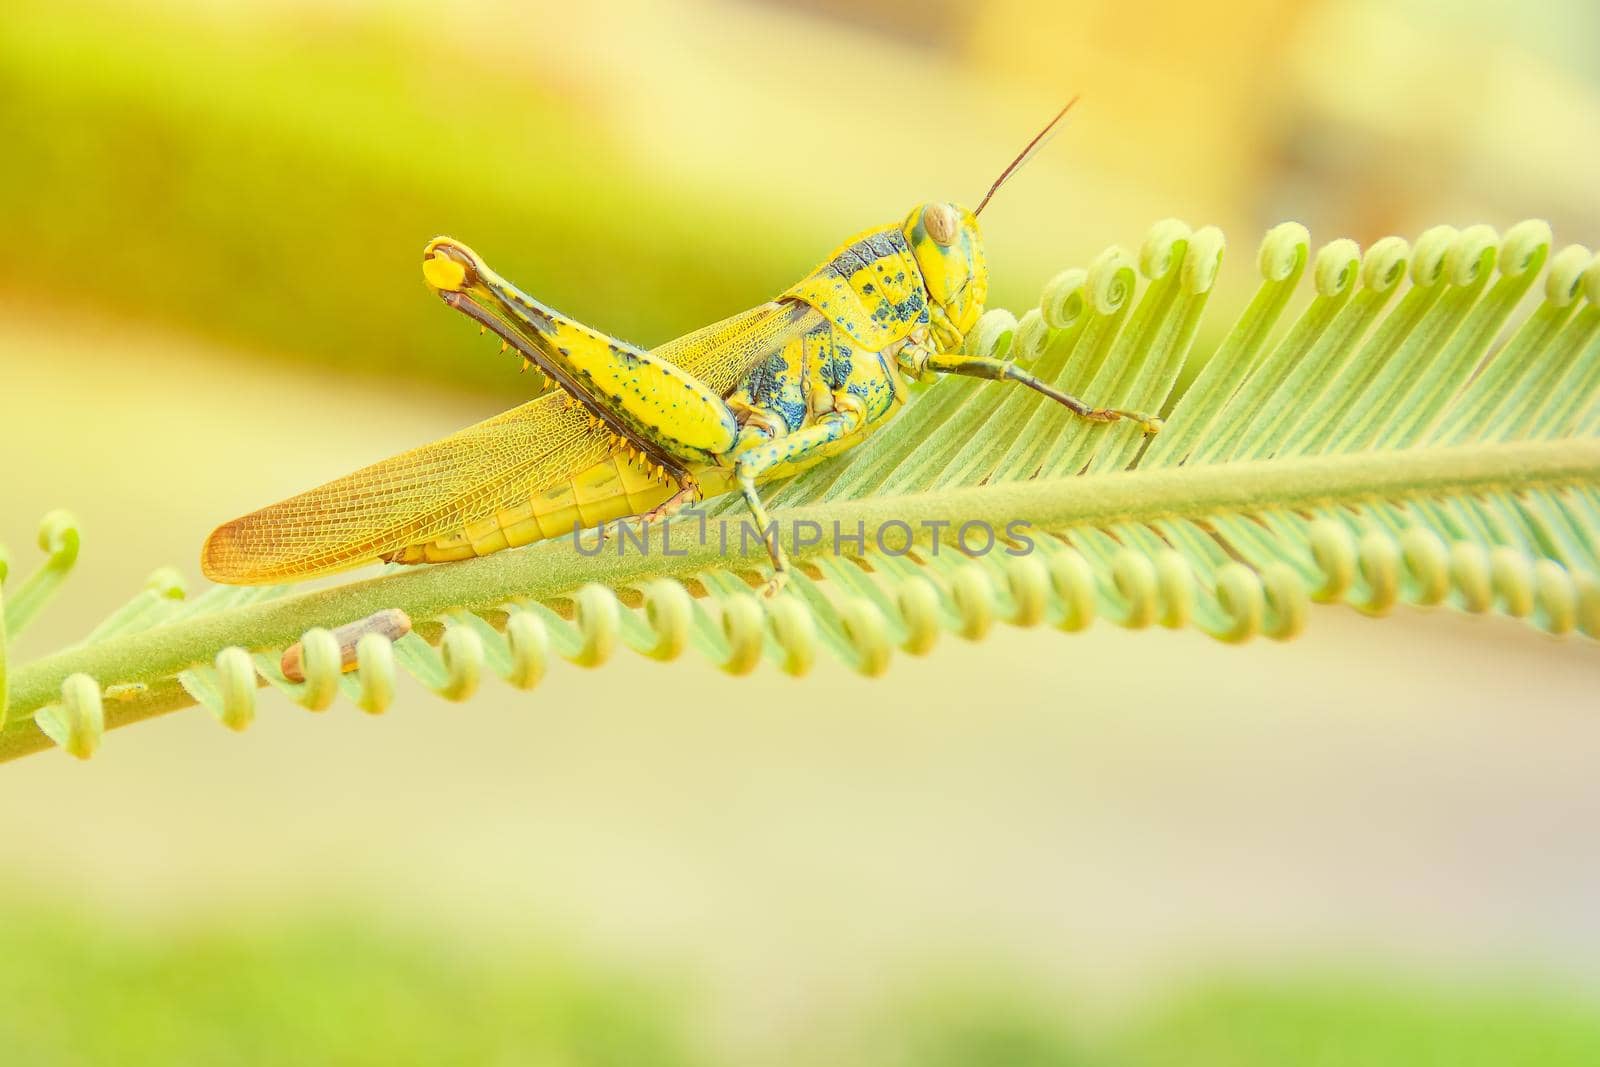 grasshopper yellow on branch of trees with copy space add text select focus with shallow depth of field. by pramot